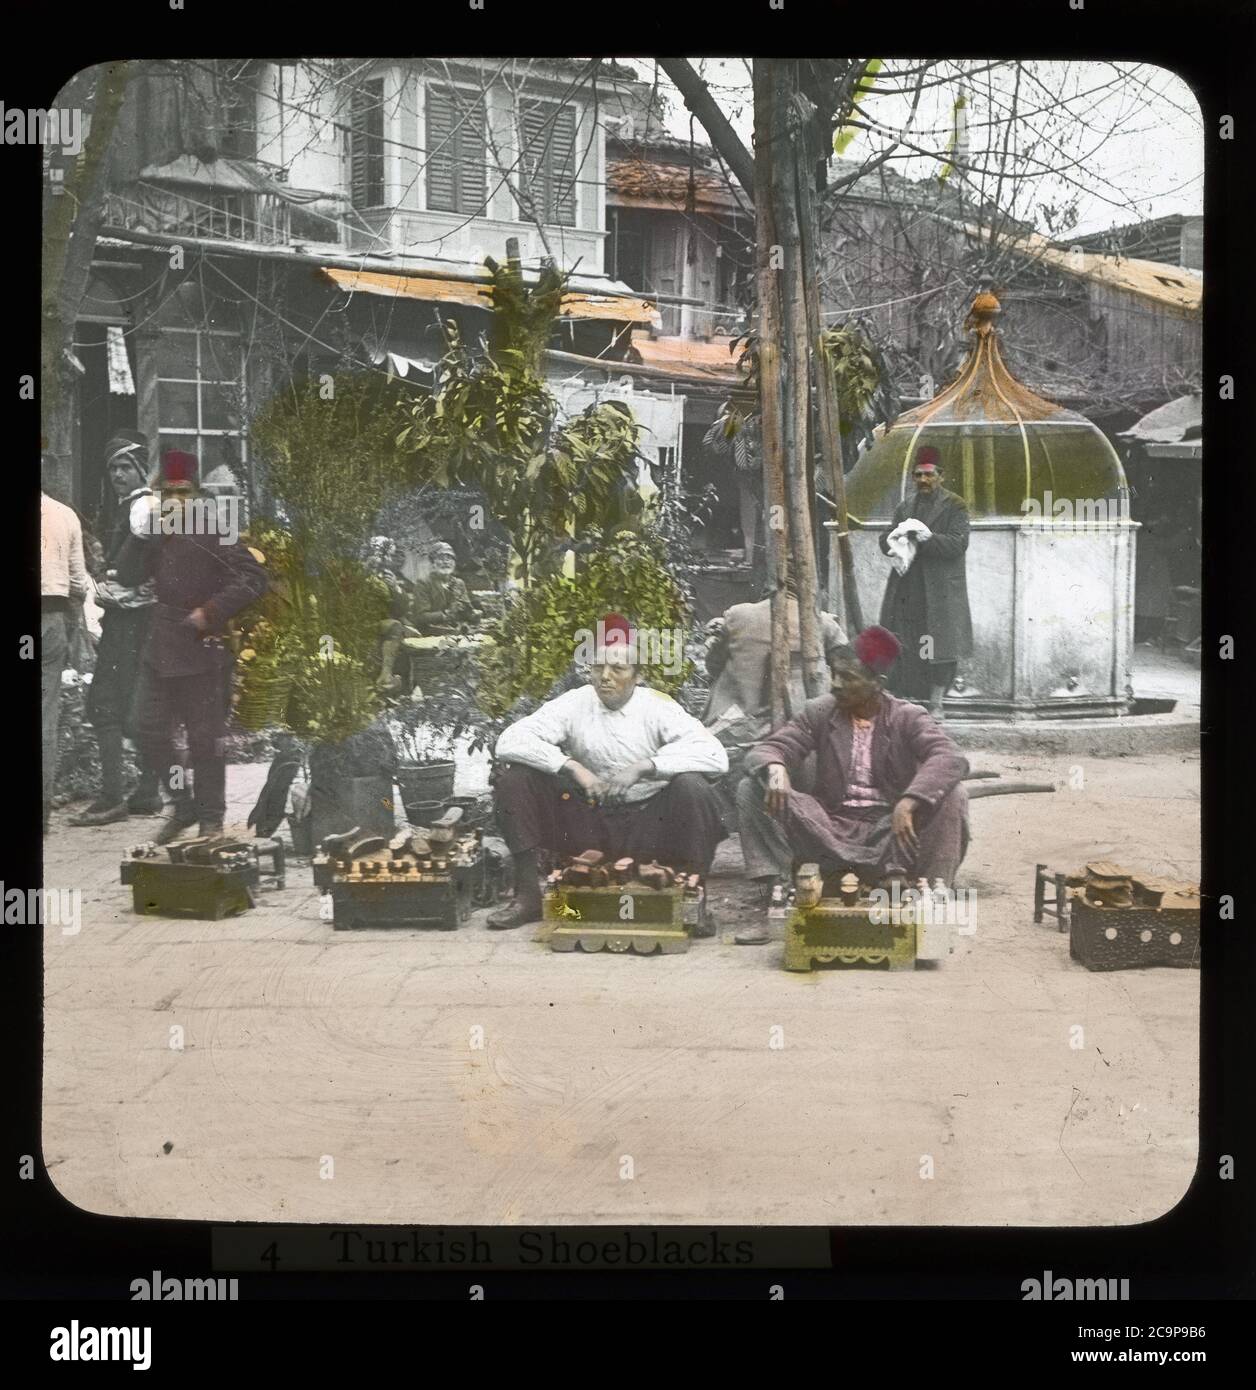 Smyrna/Izmir, Turkey shoeshiner waiting for customers. Hand-colored photograph on dry glass plate from the Herry W. Schaefer collection, around 1910. Stock Photo